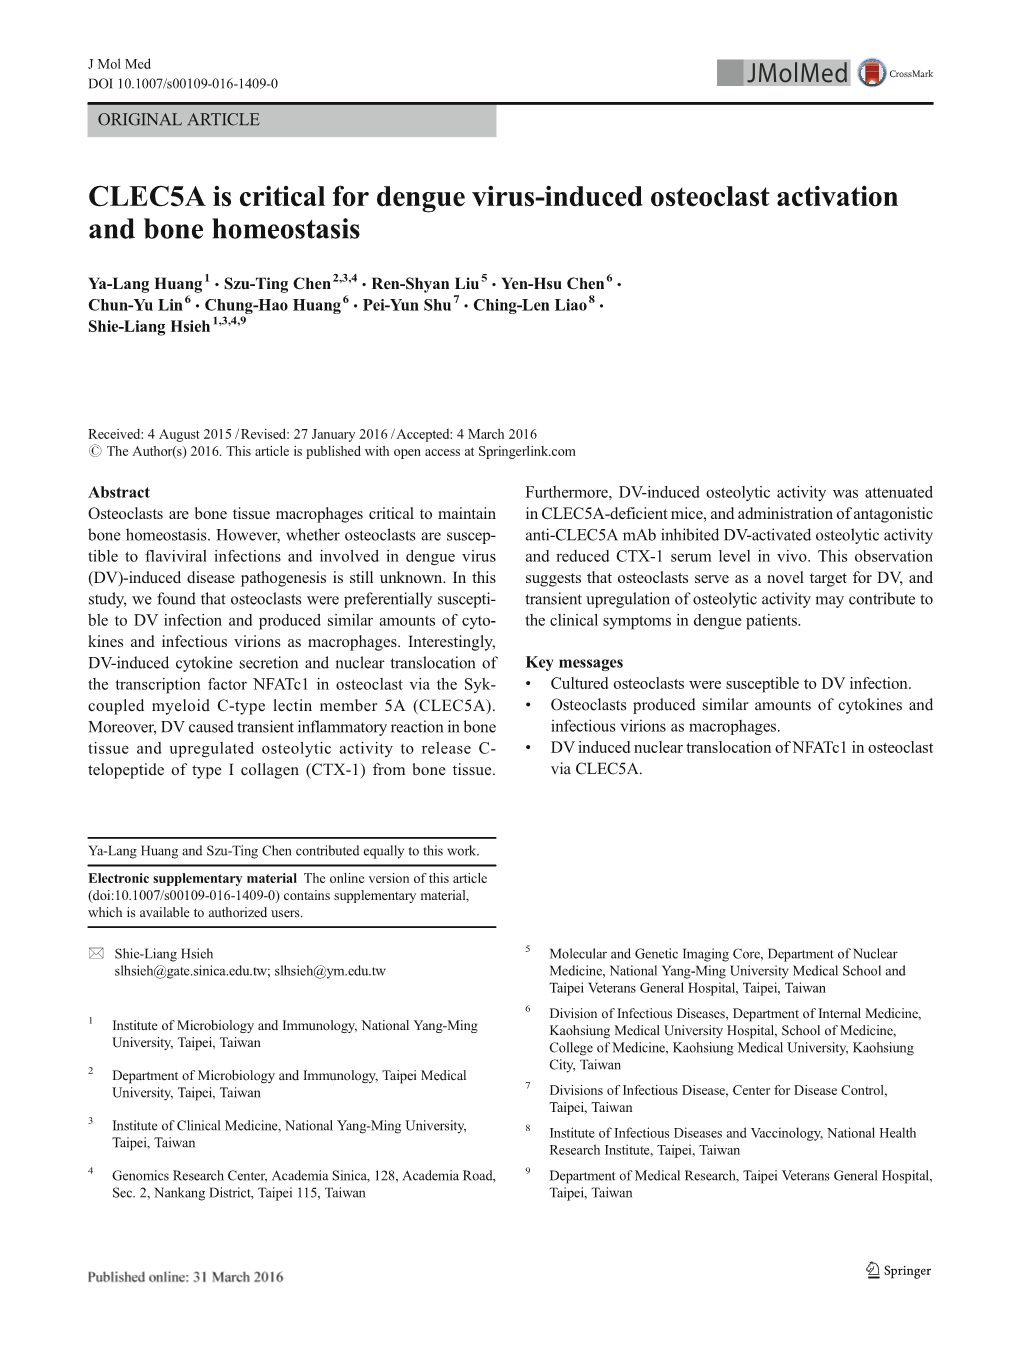 CLEC5A Is Critical for Dengue Virus-Induced Osteoclast Activation and Bone Homeostasis